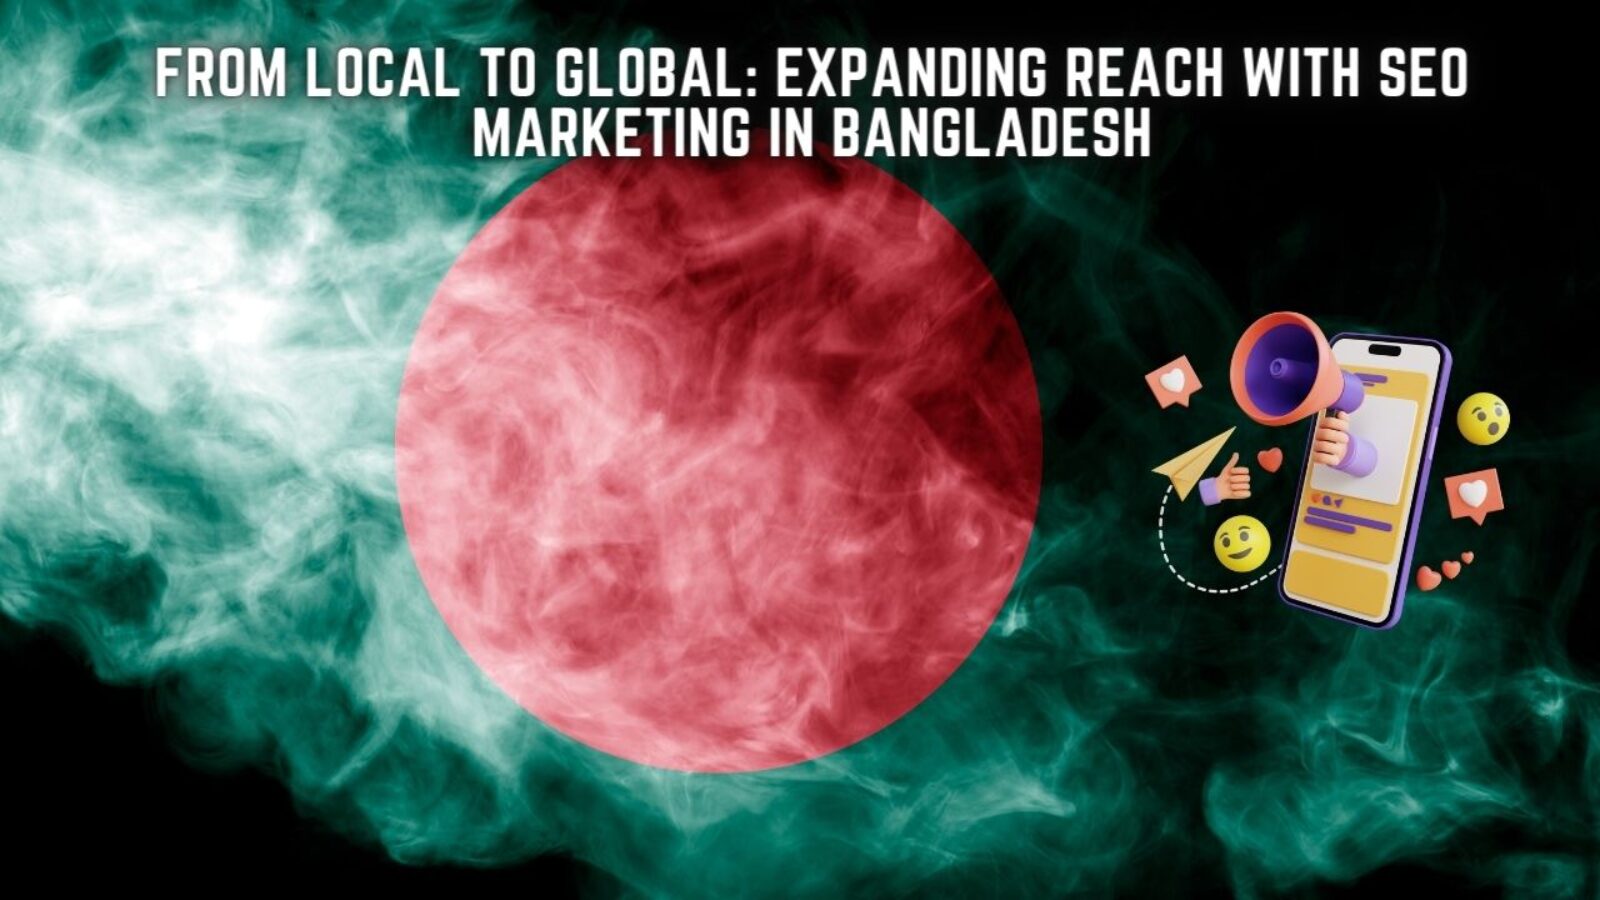 From Local to Global: Expanding Reach with SEO Marketing in Bangladesh